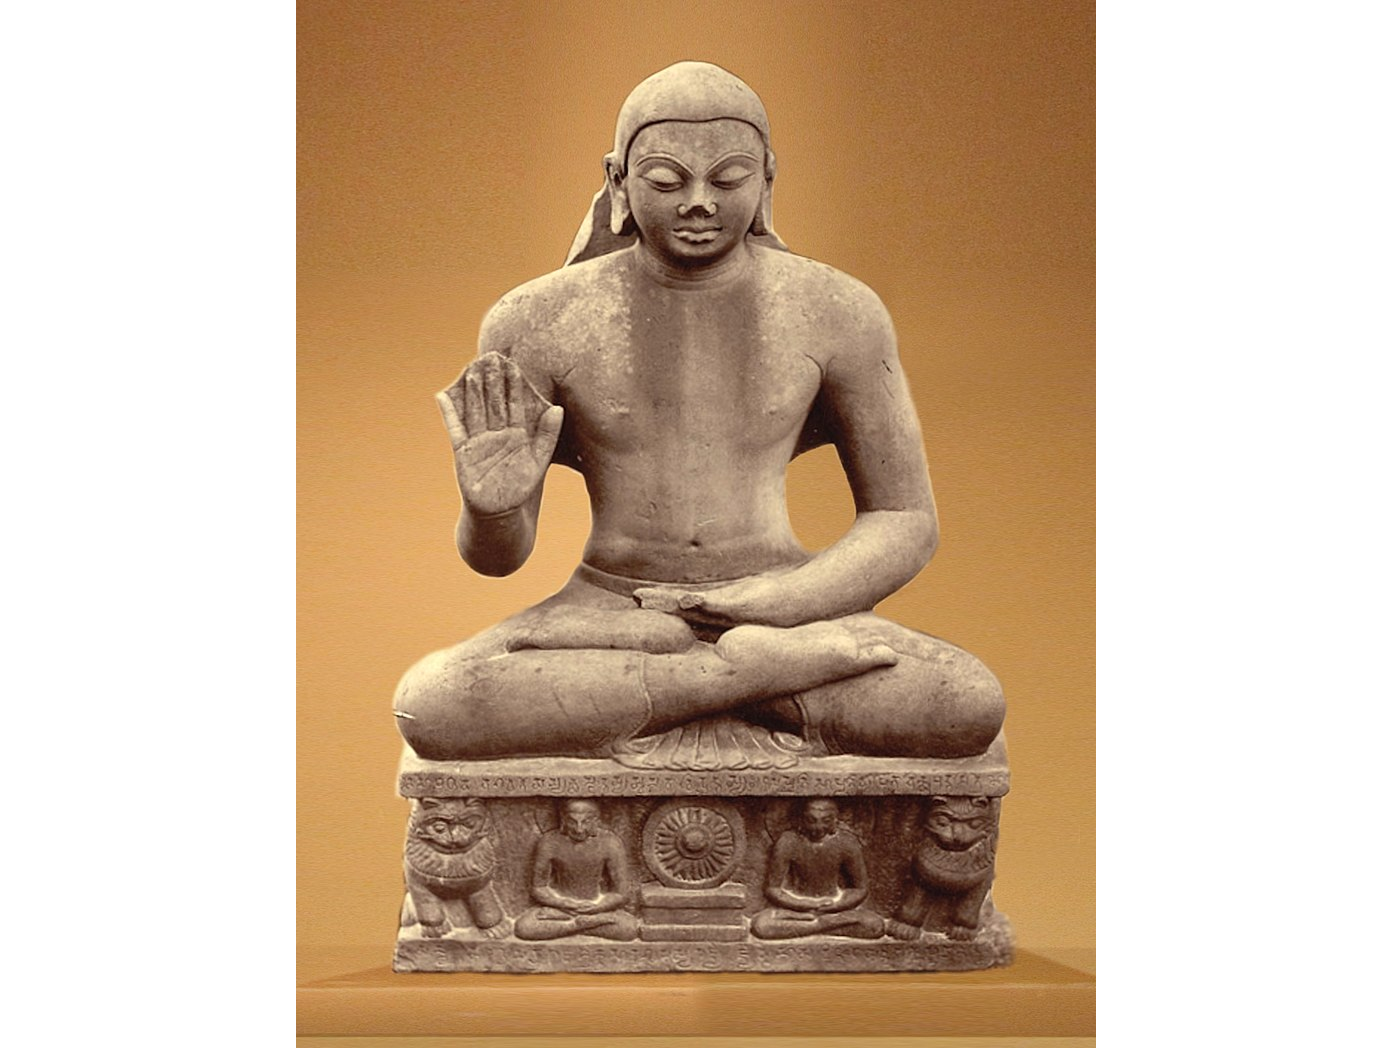 The Mankuwar Buddha, dated to the end of the reign of Kumara Gupta I in 448 CE